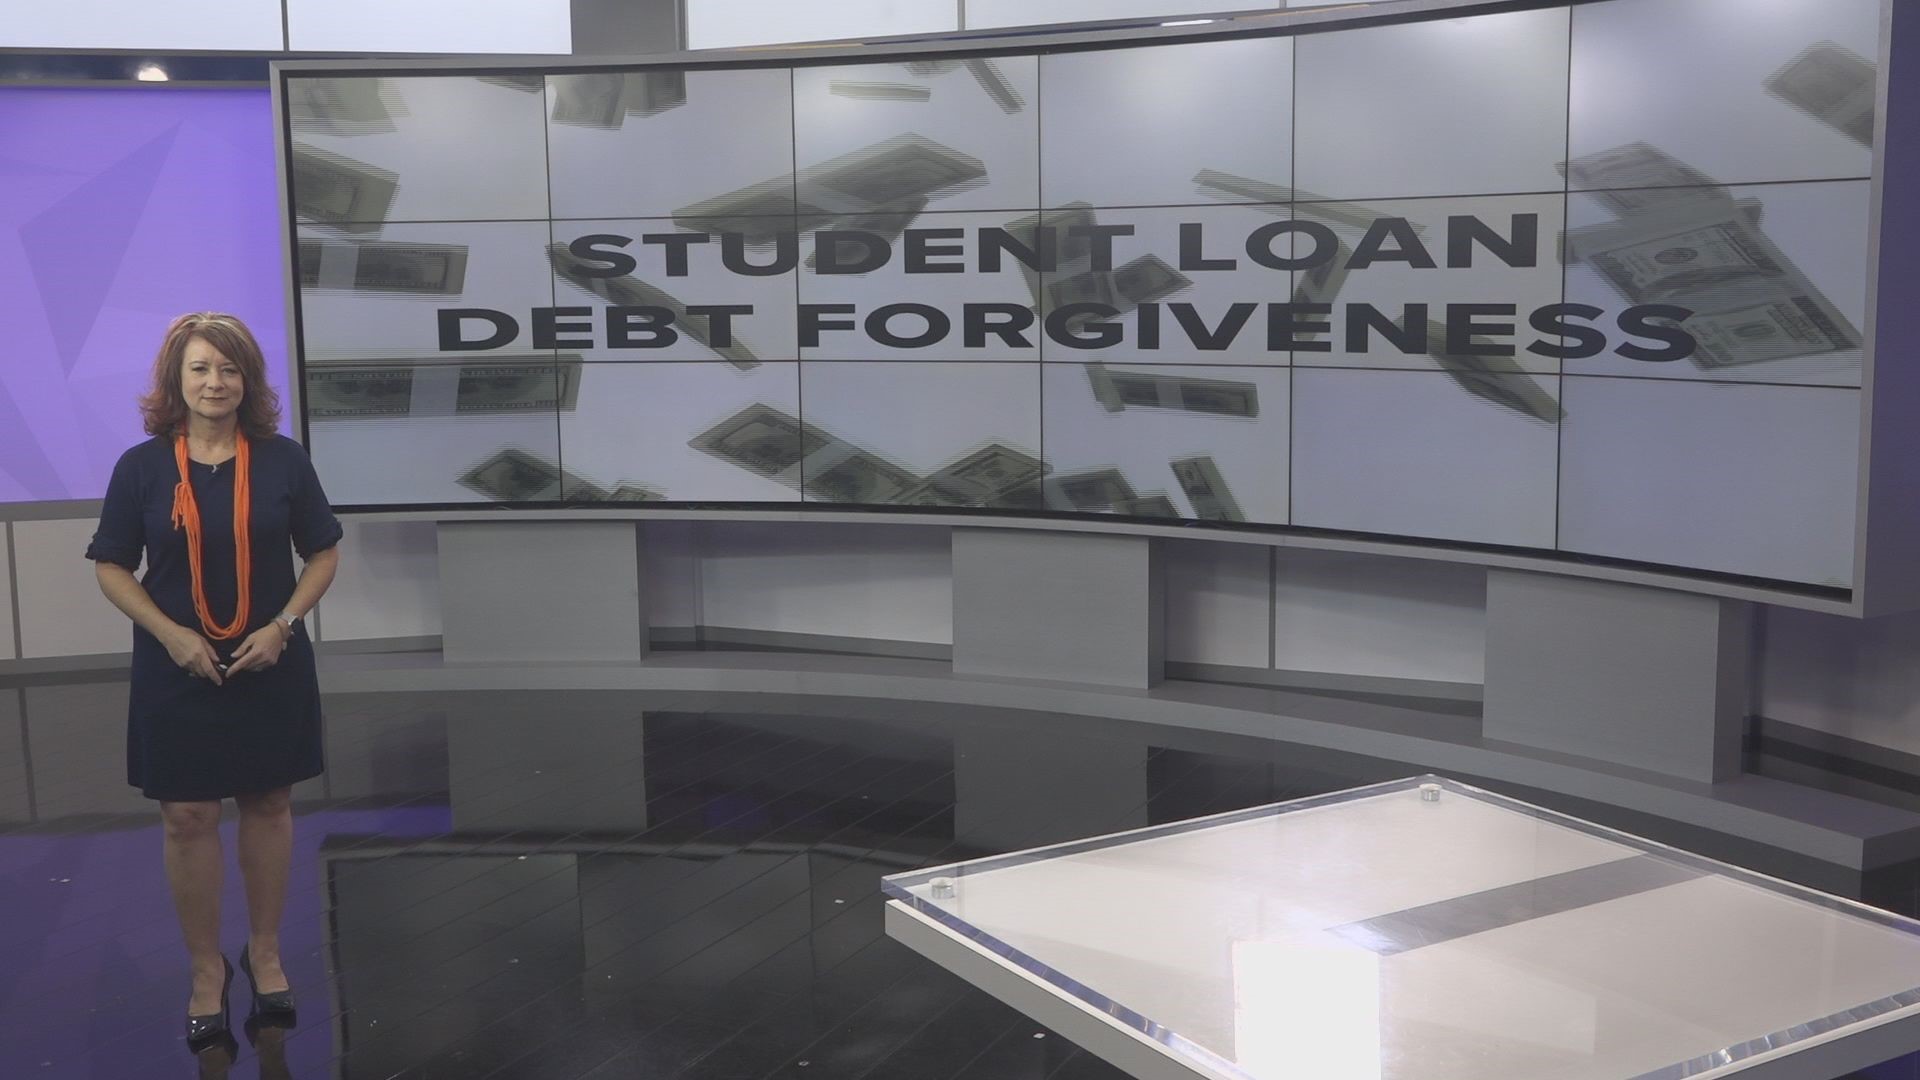 The federal student debt forgiveness plan requires funds to be disbursed by June 30, 2022.